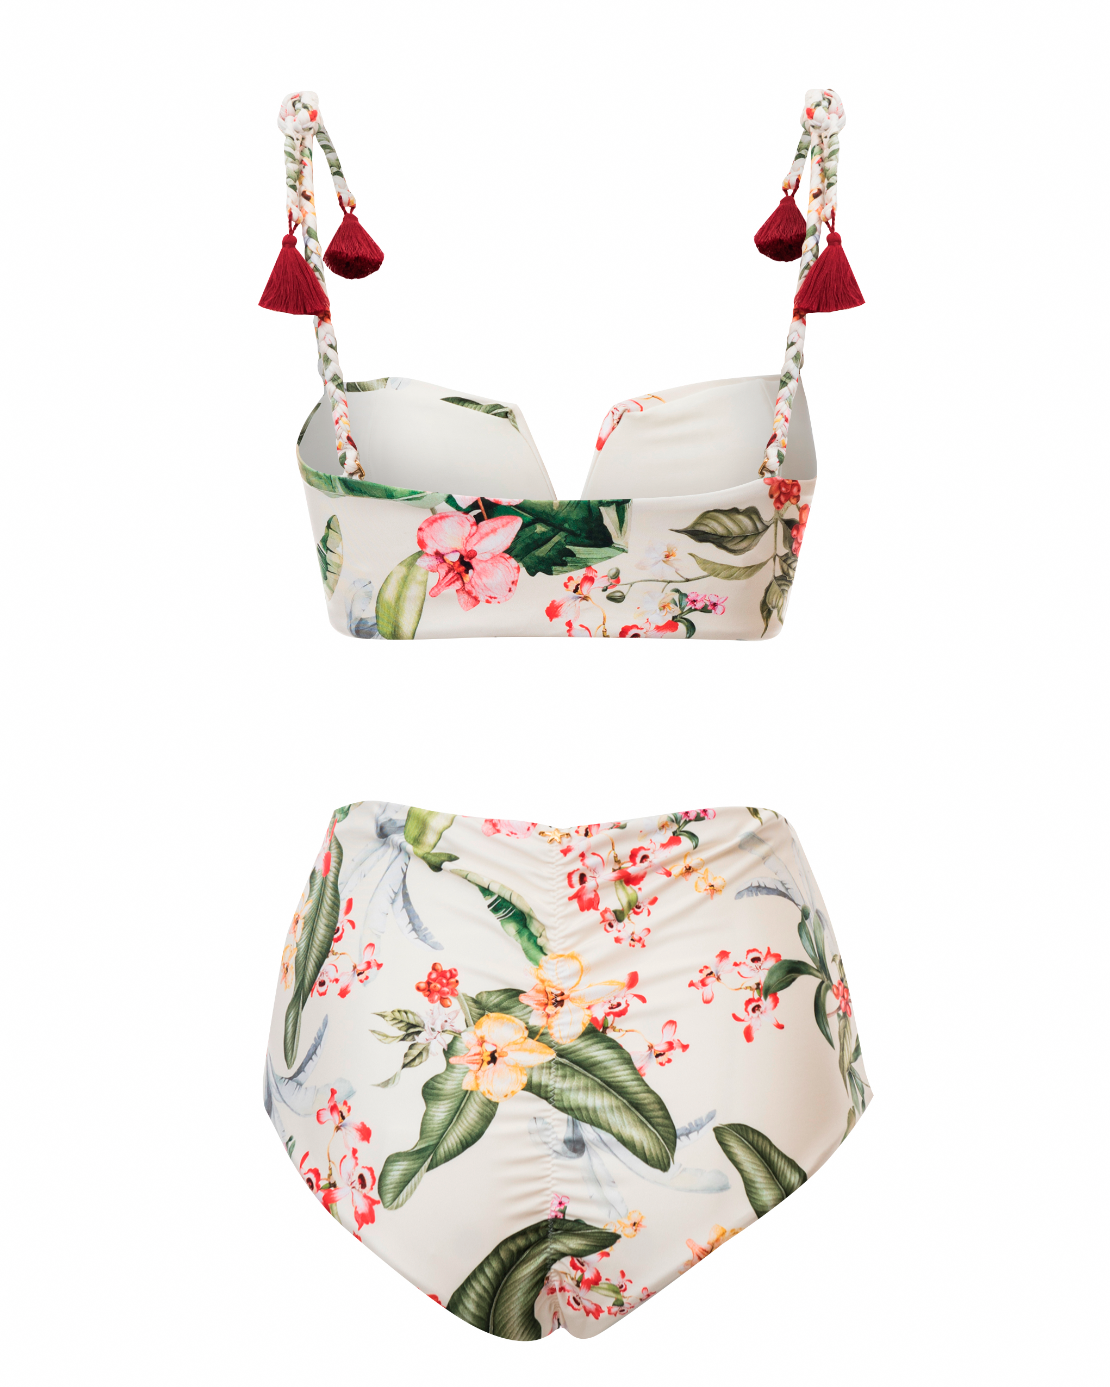 Yuly Narvaez - Quindiana Strapless Two Pieces